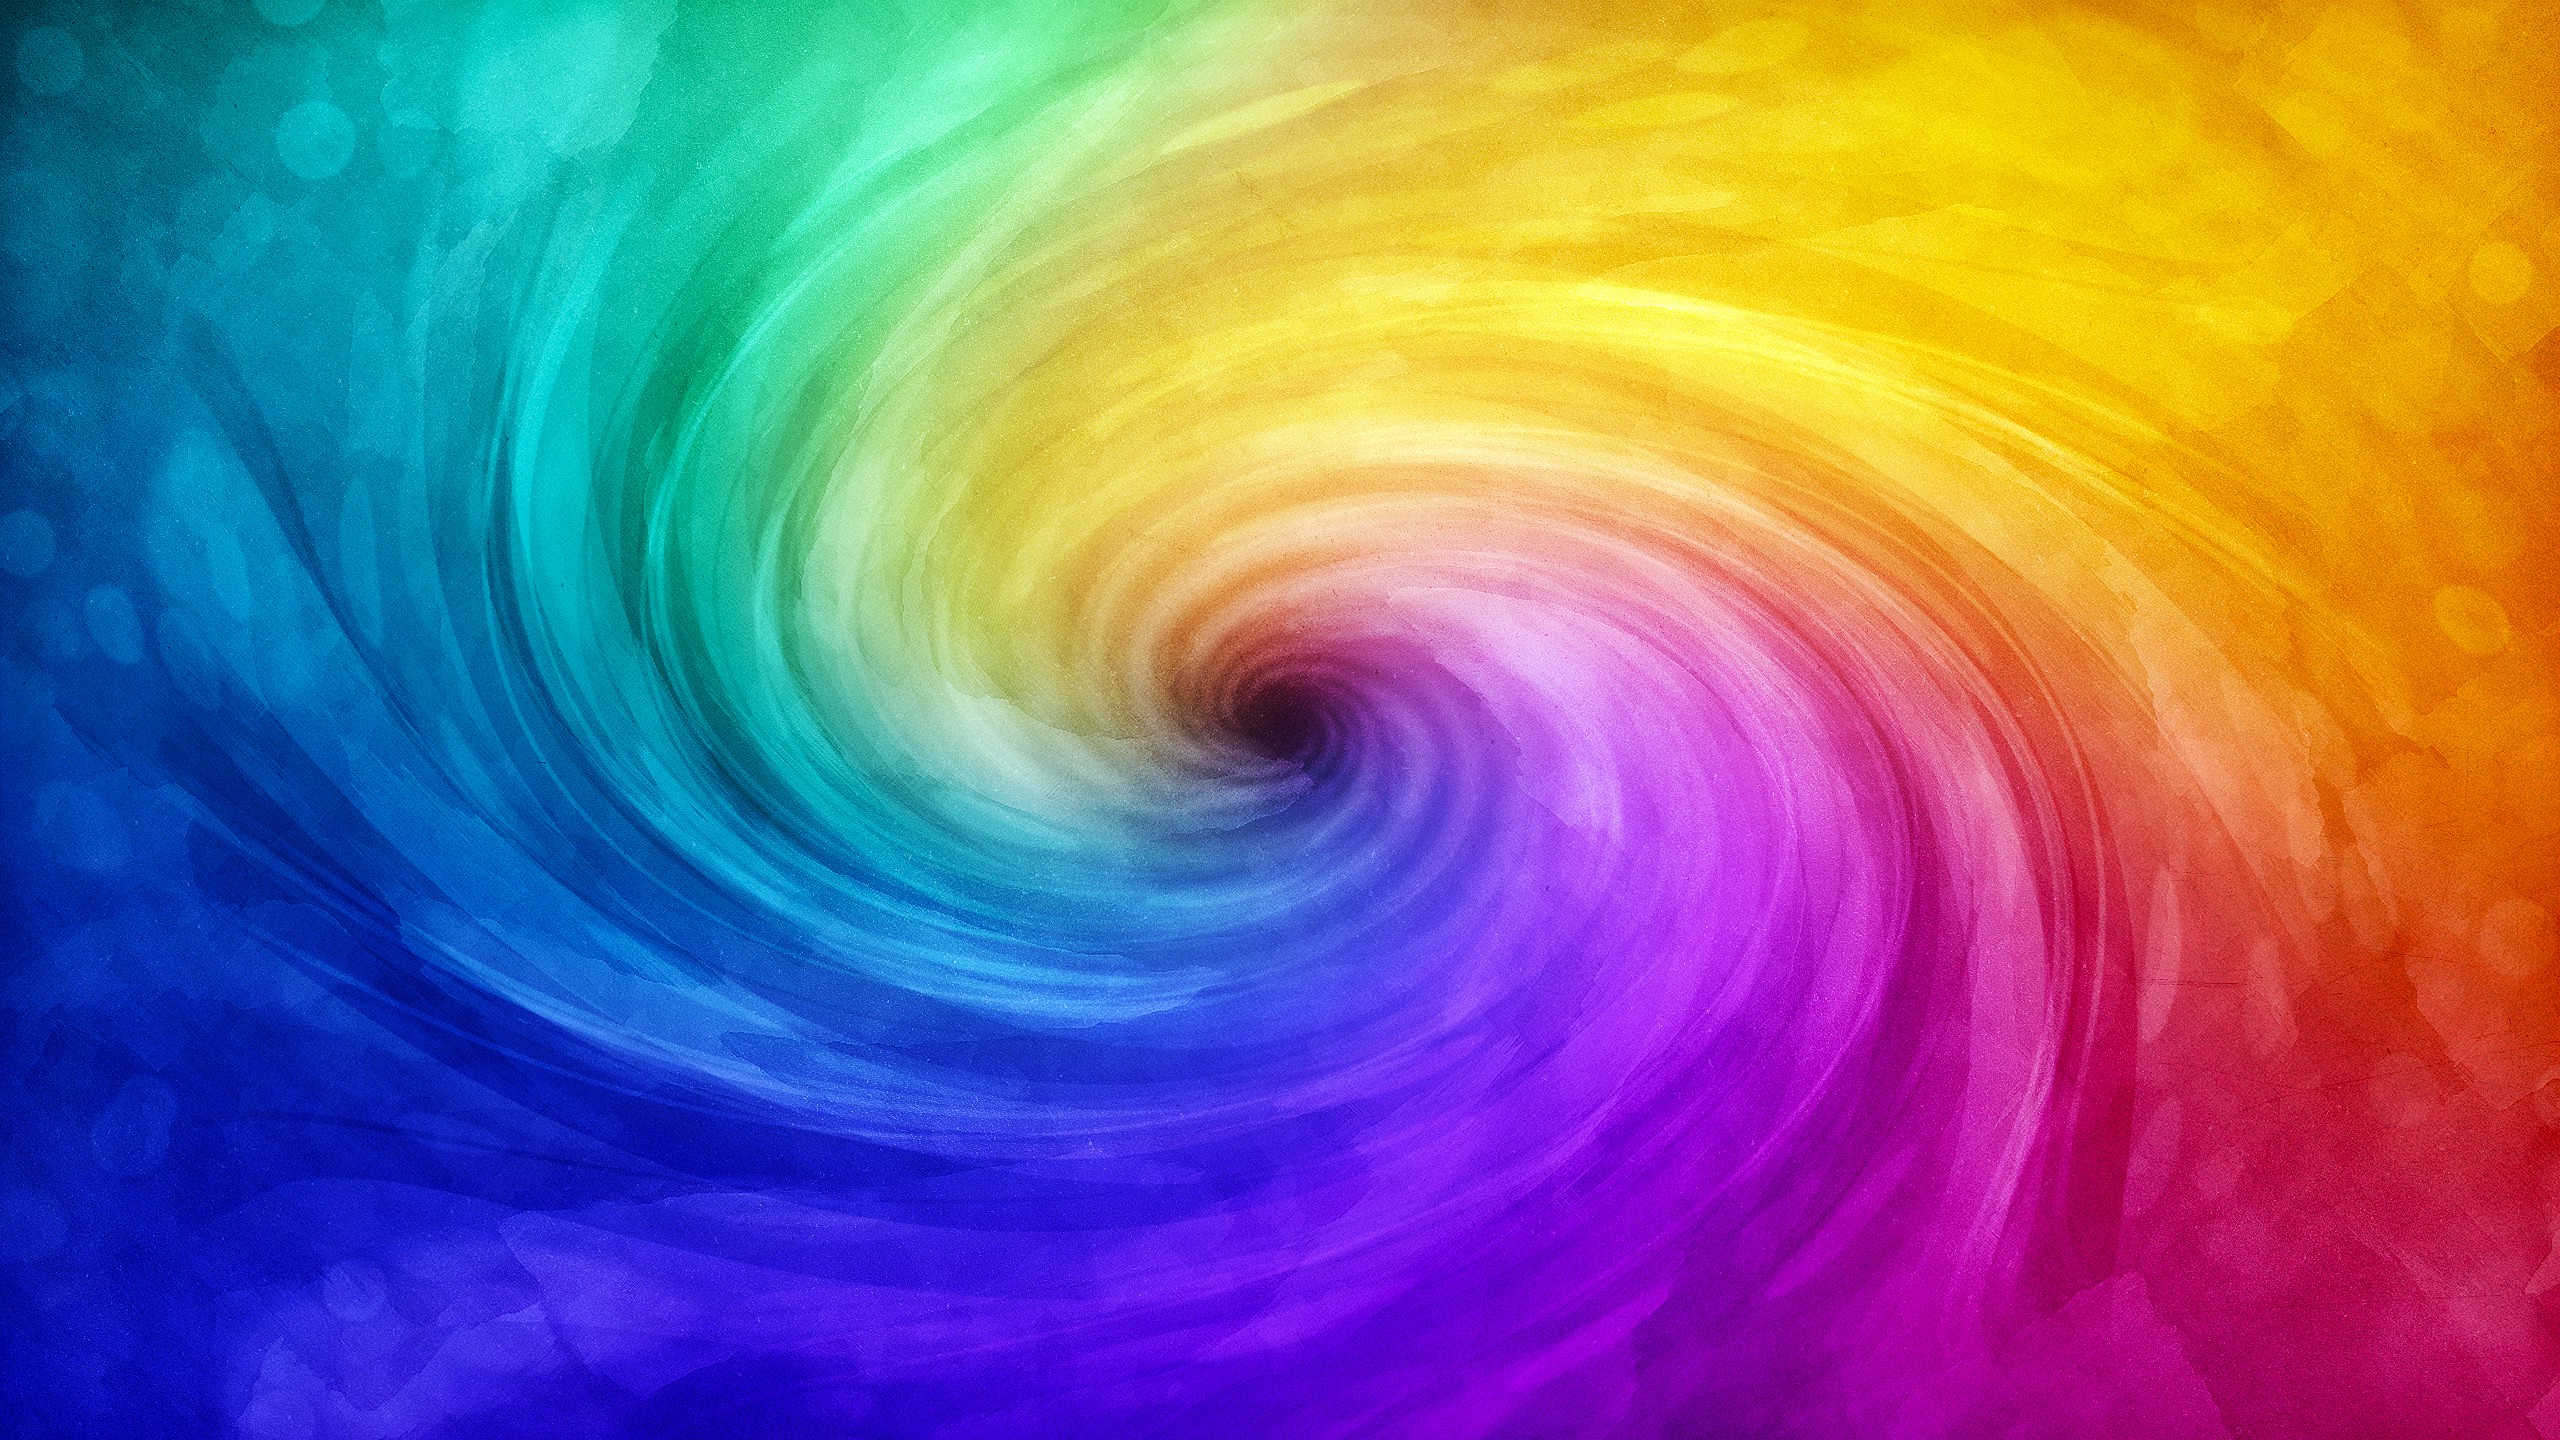 abstract, Spiral, Colorful Wallpapers HD / Desktop and Mobile Backgrounds